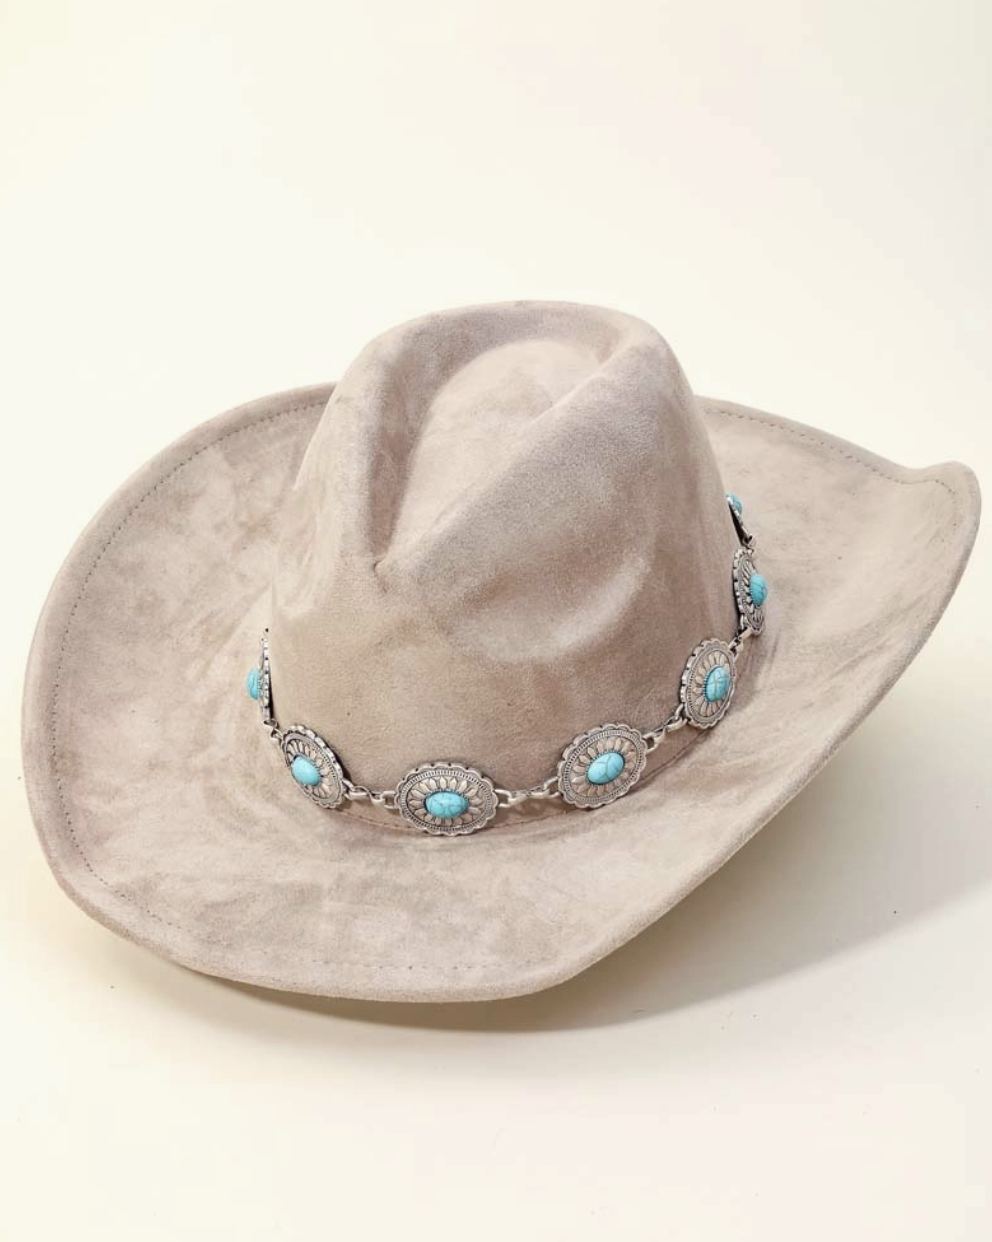 Turquoise oval stone band Cowboy hat